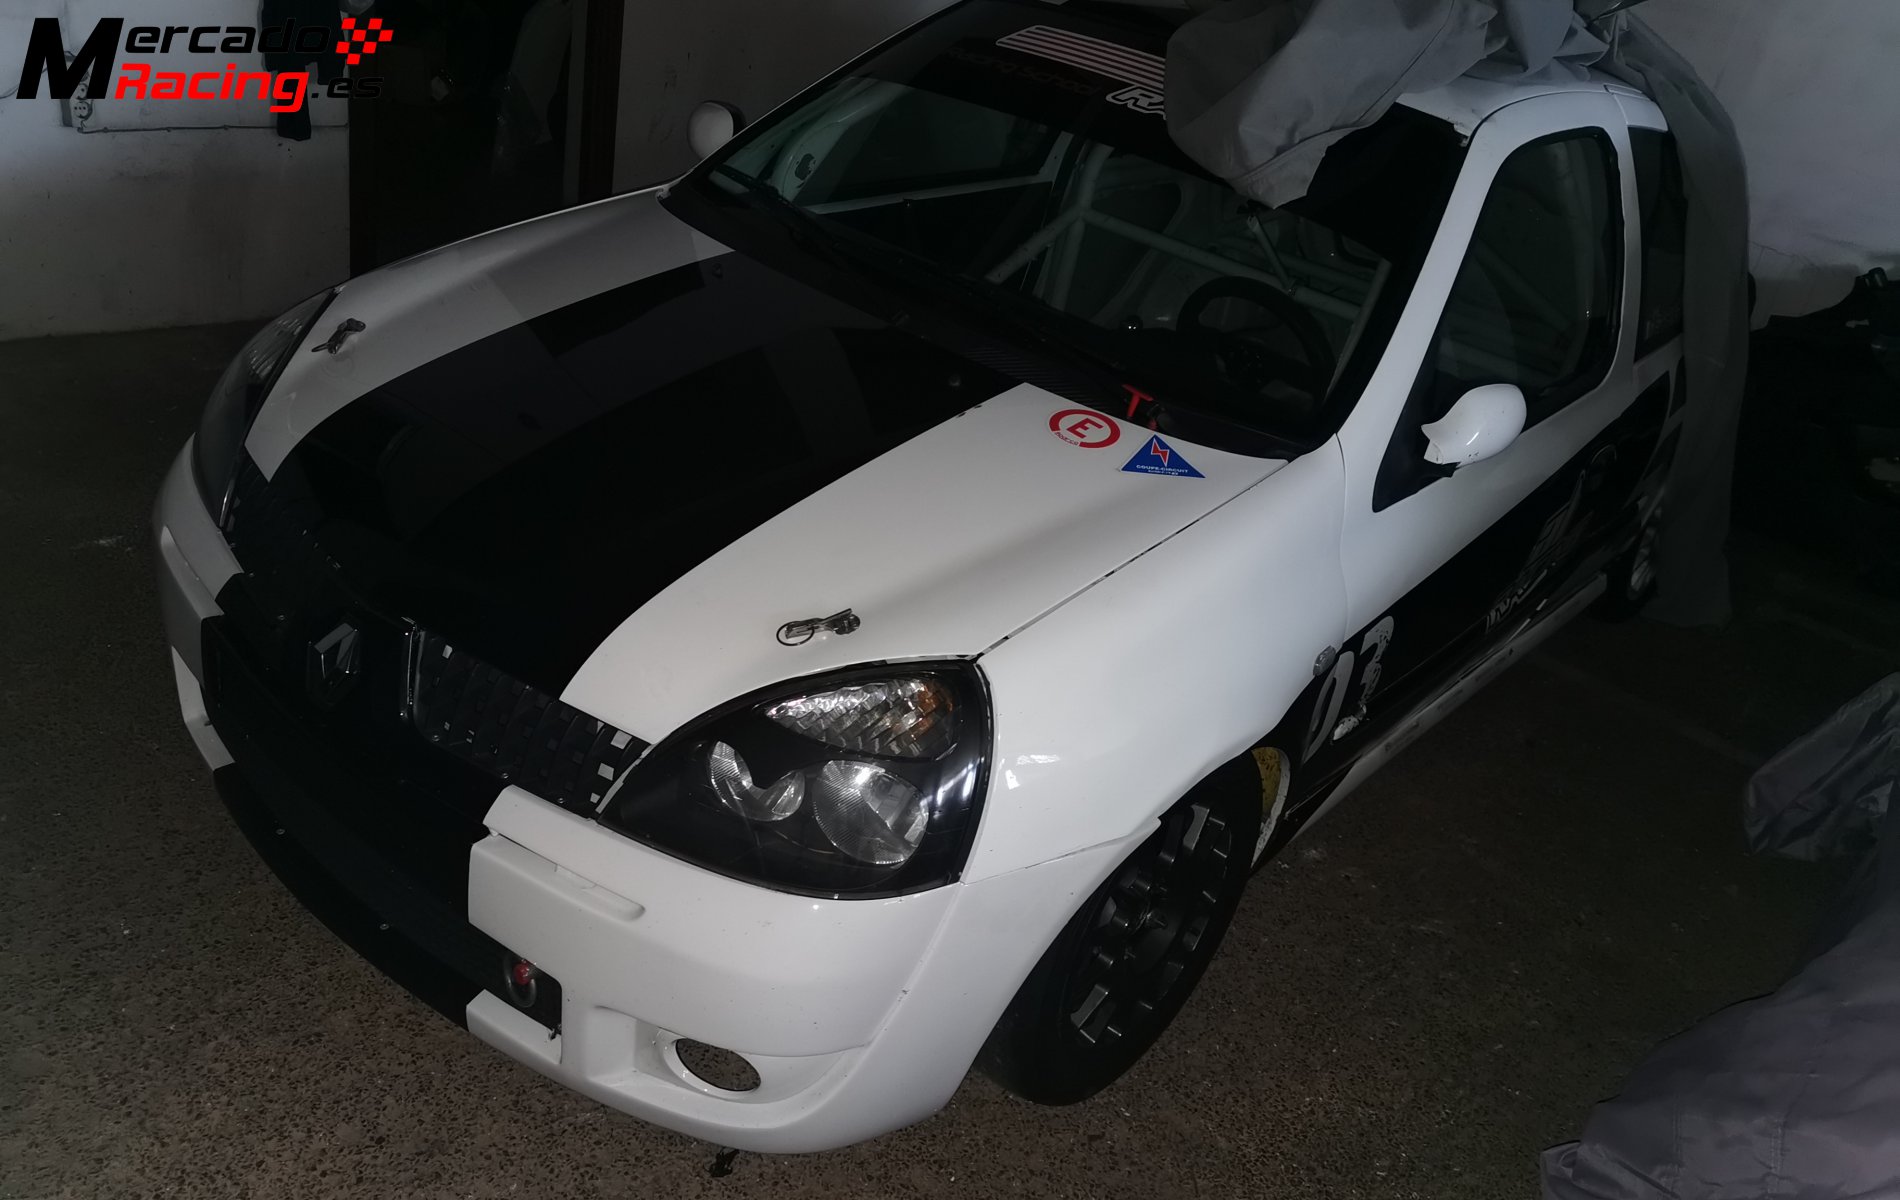 Clio cup 